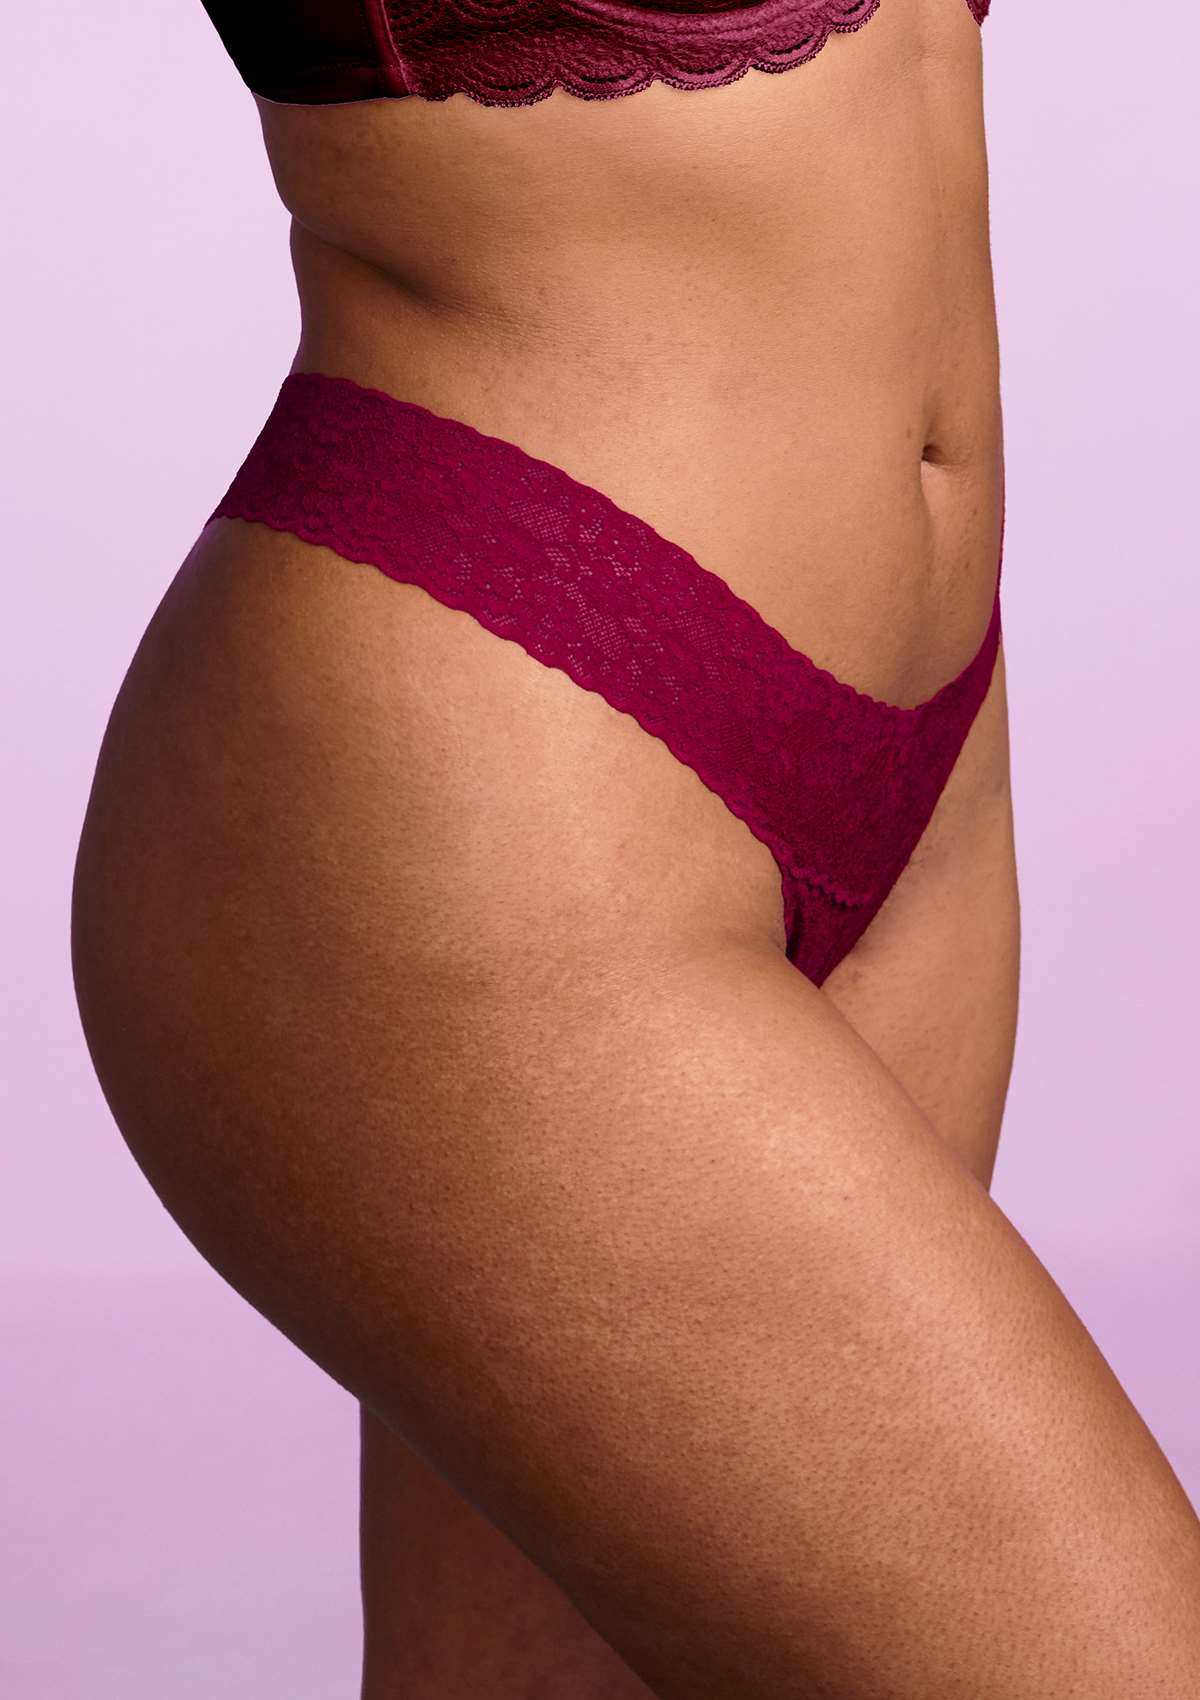 HSIA Soft Sexy Lace Cheeky Thong Underwear 3 Pack - S / Black+Burgundy+White